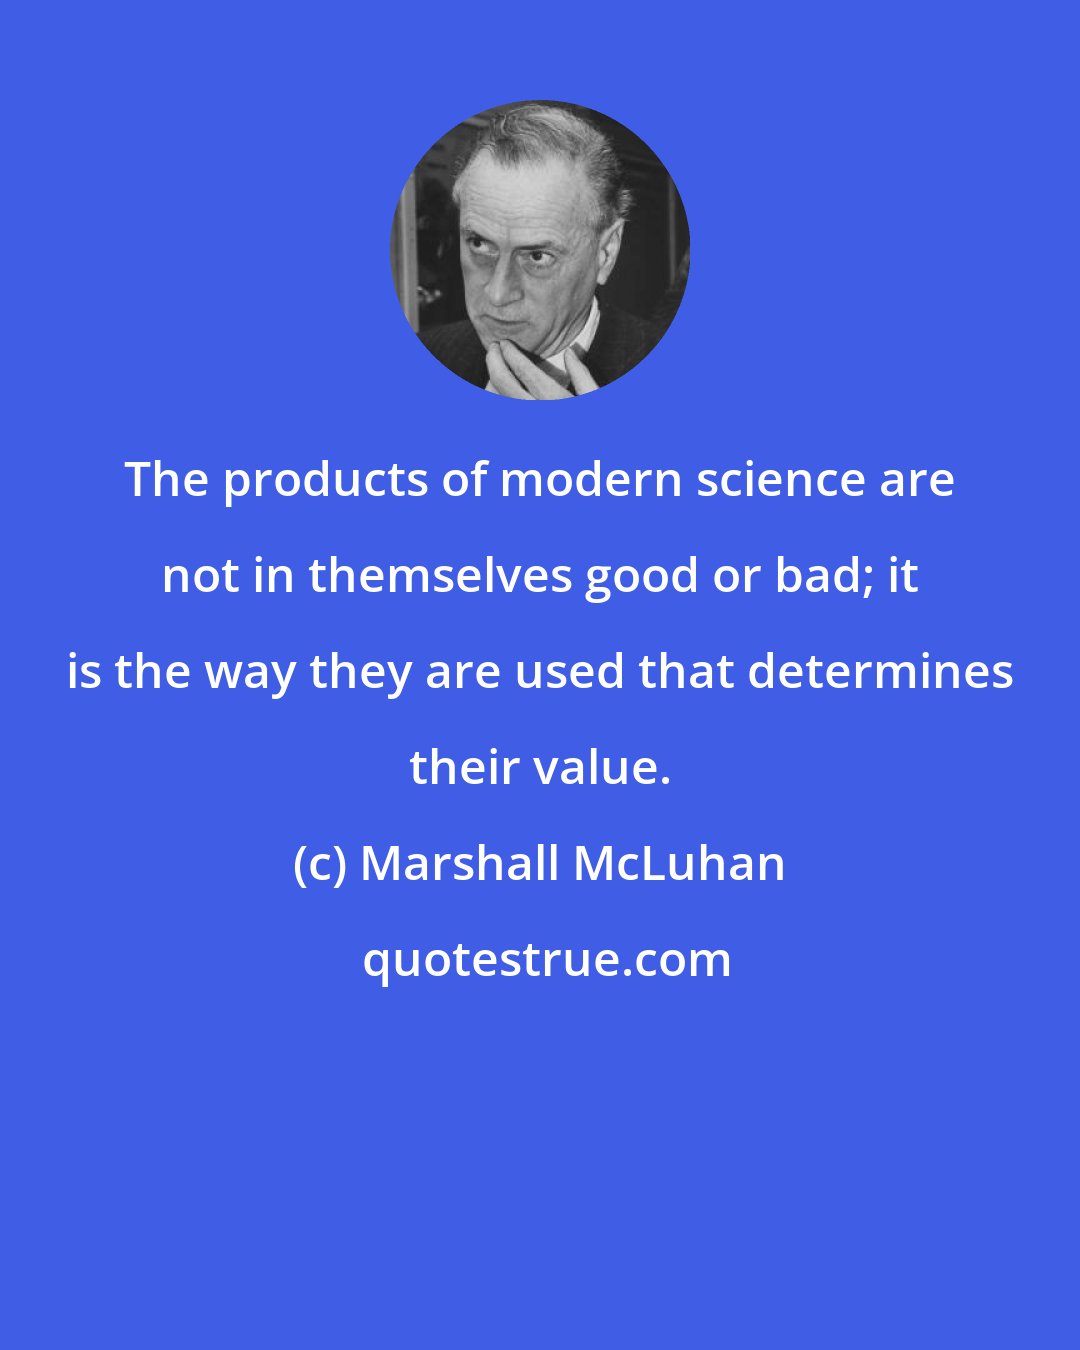 Marshall McLuhan: The products of modern science are not in themselves good or bad; it is the way they are used that determines their value.